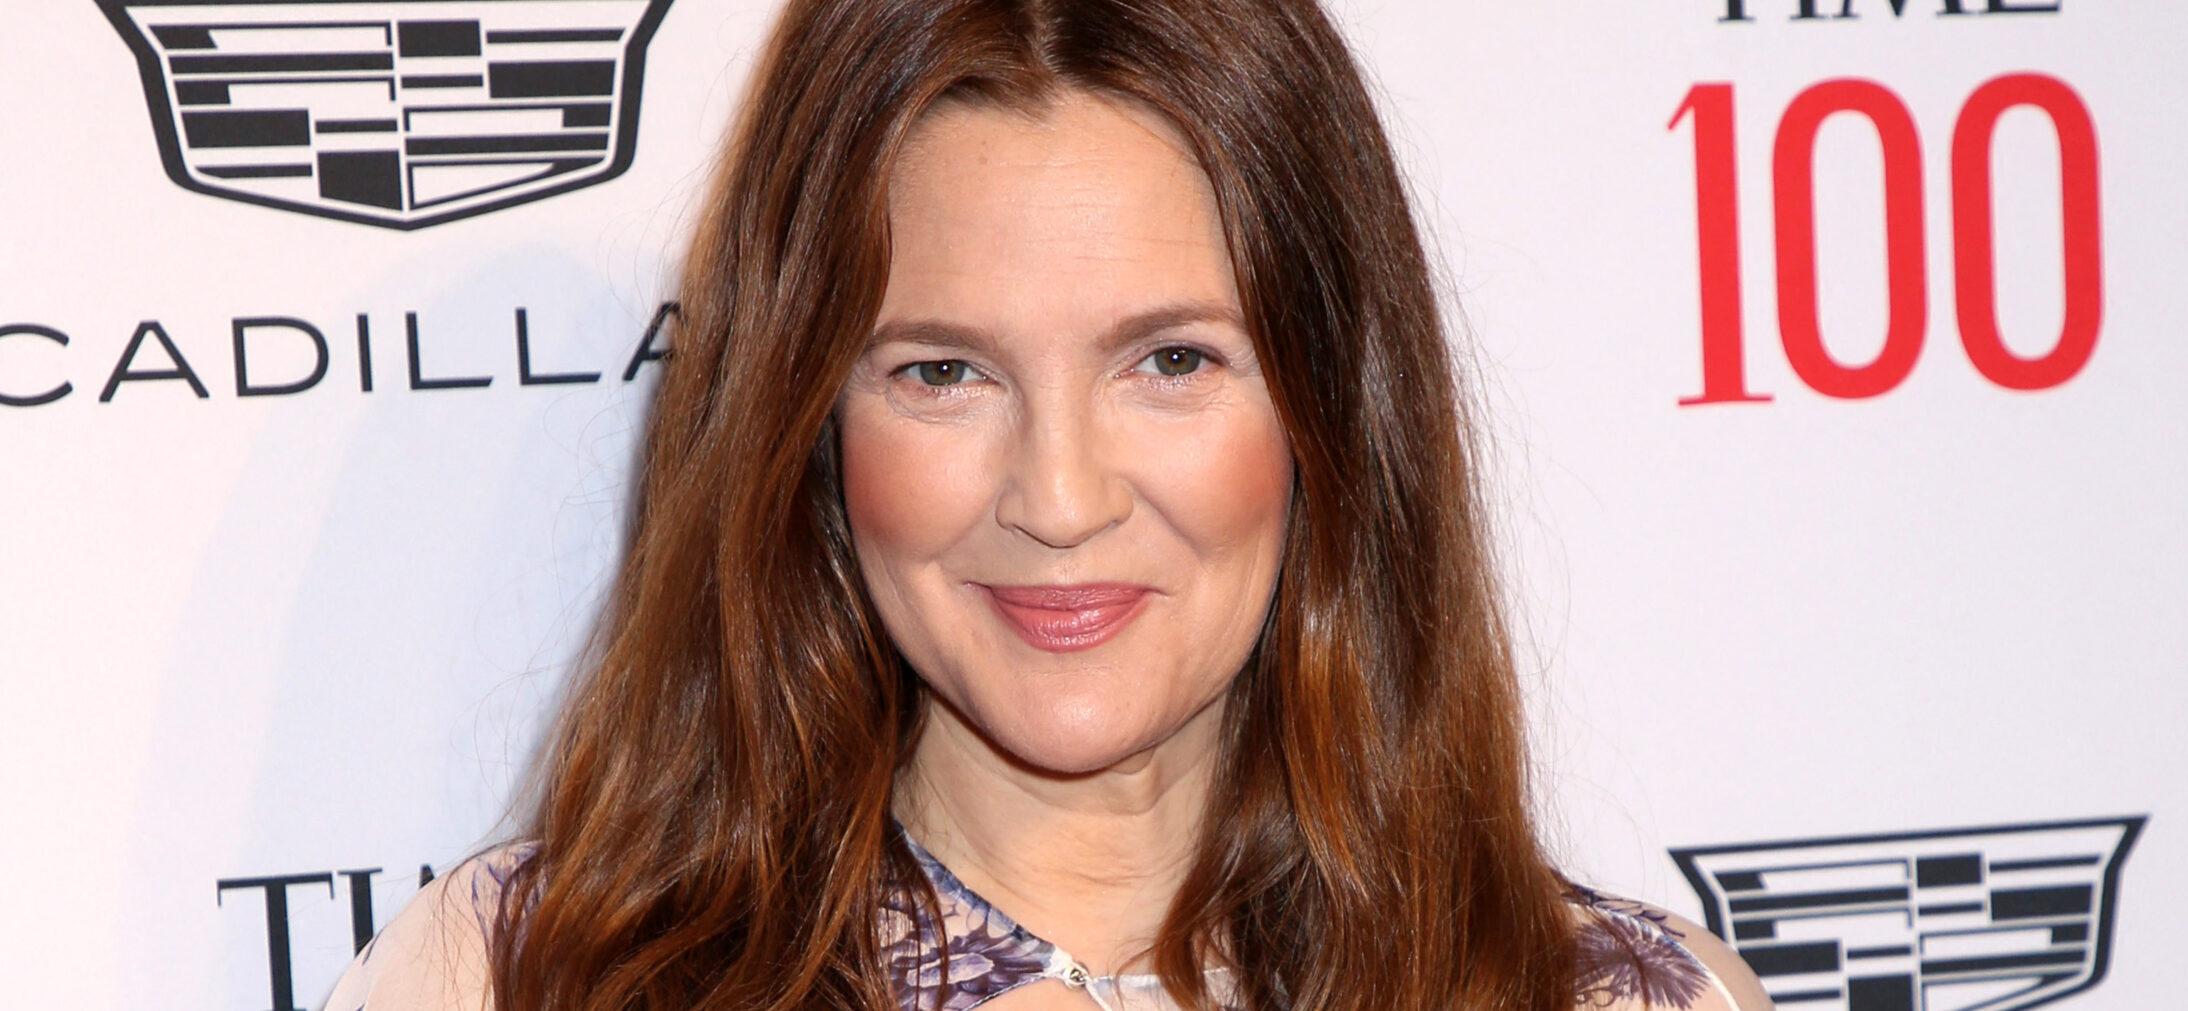 Drew Barrymore’s Stalker Has Reportedly Been Set Free After Arrest For Showing Up At Her Home